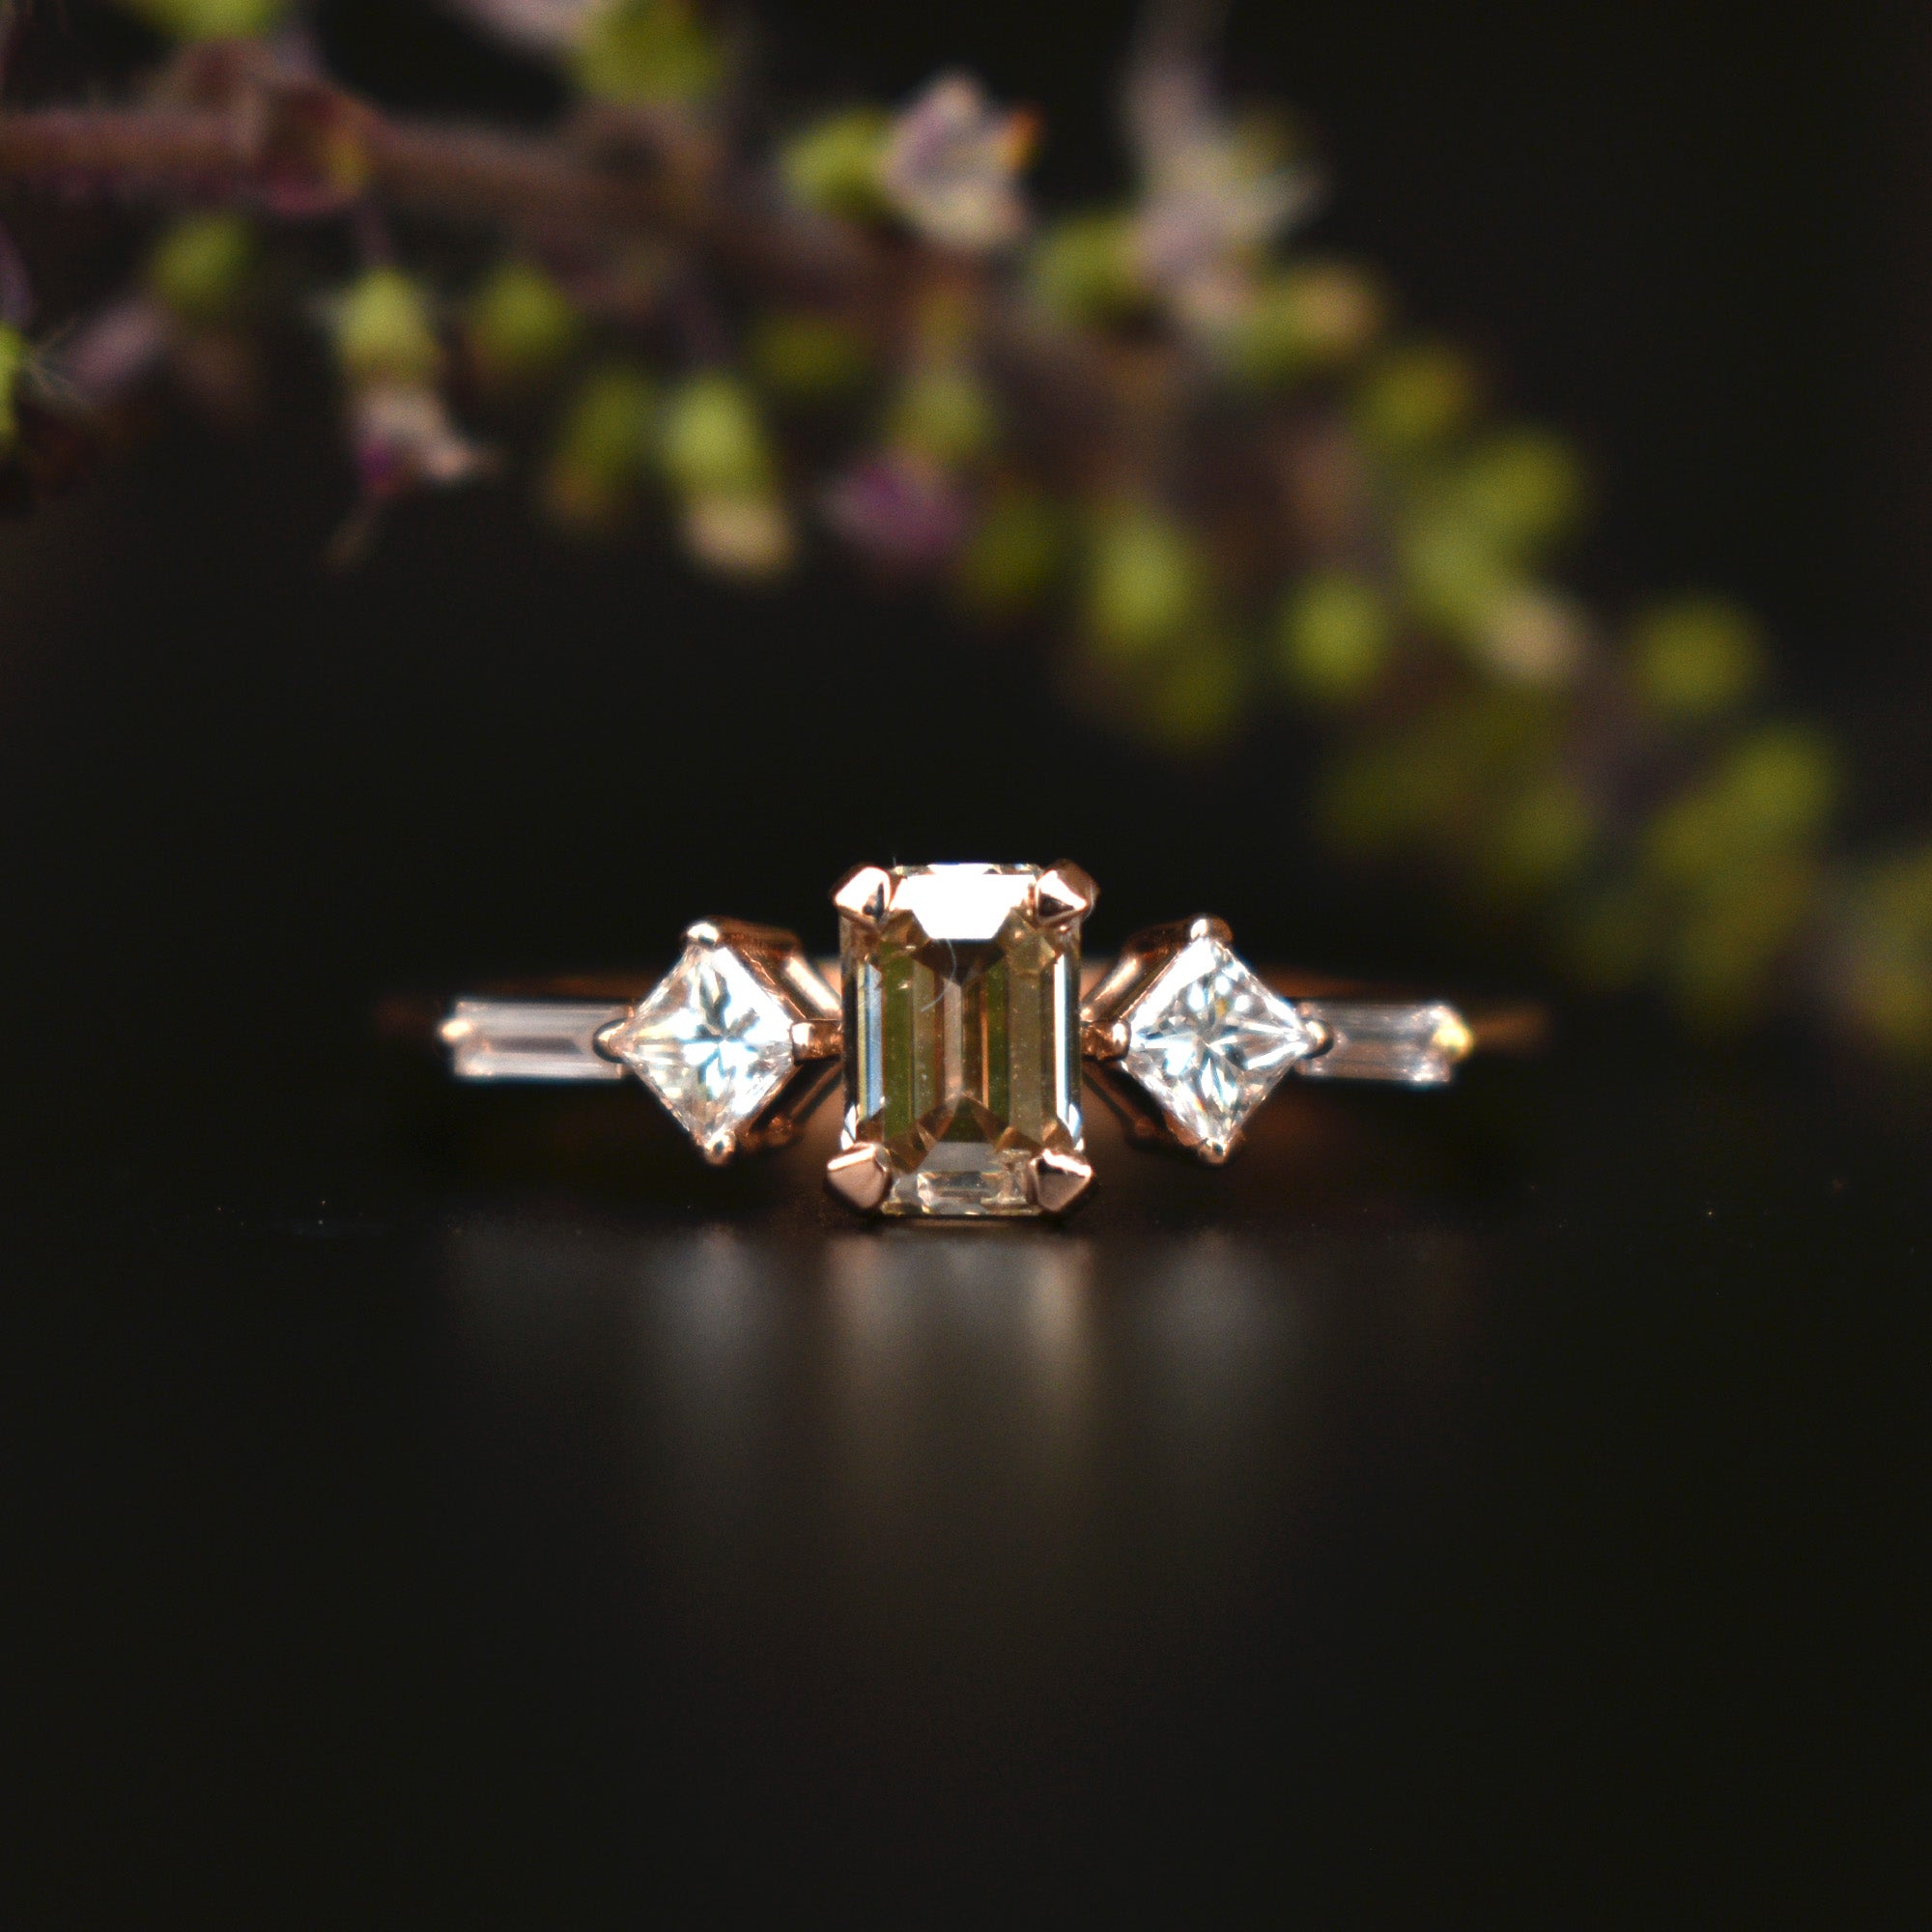 0.60 Ct Champagne Emerald Cut Diamond Engagement Ring in 14K Rose